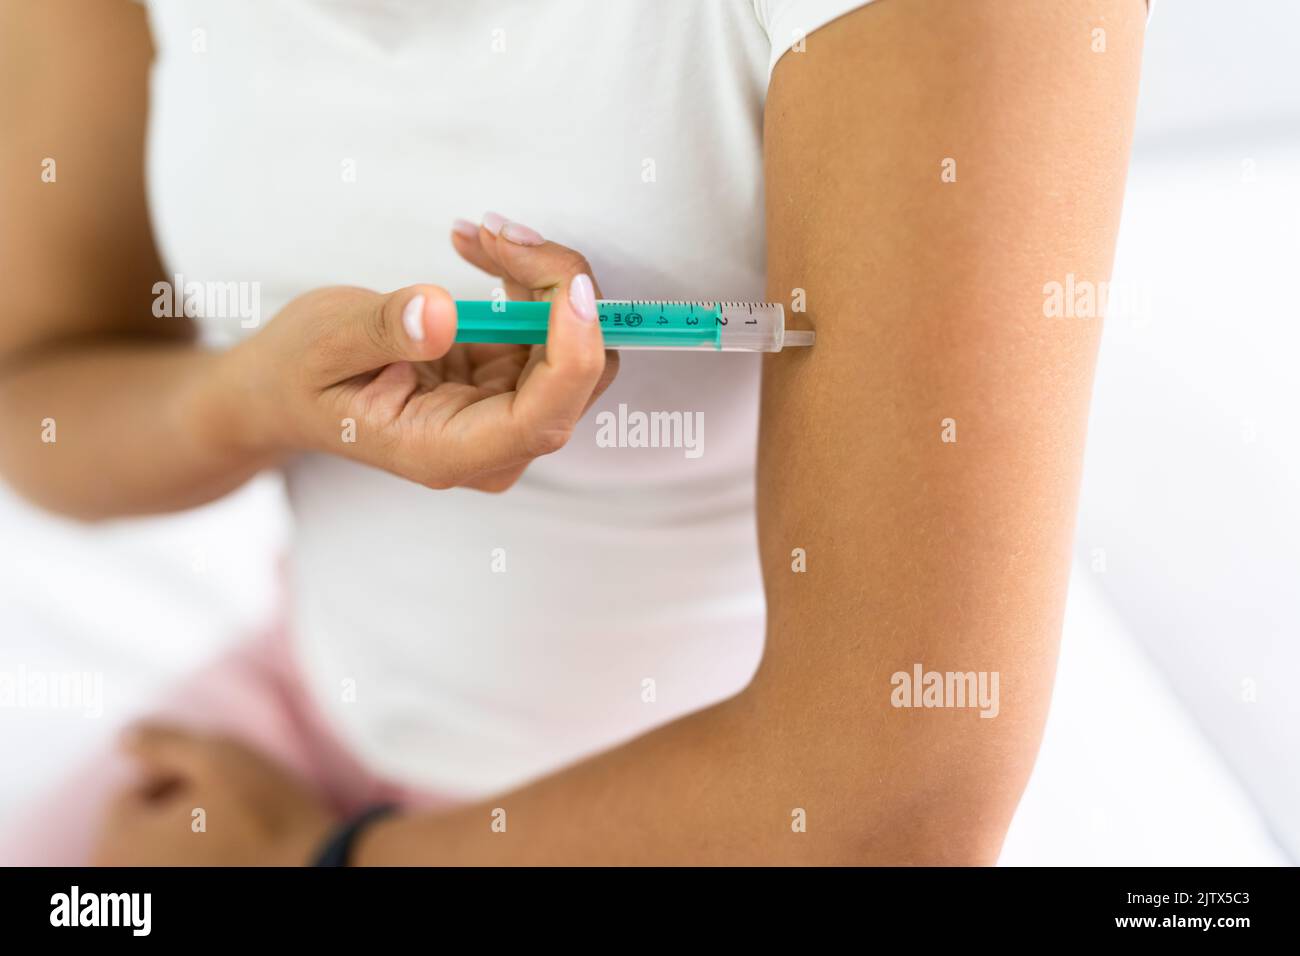 Medicine Pen Inject. Woman With Diabetes Treatment Stock Photo